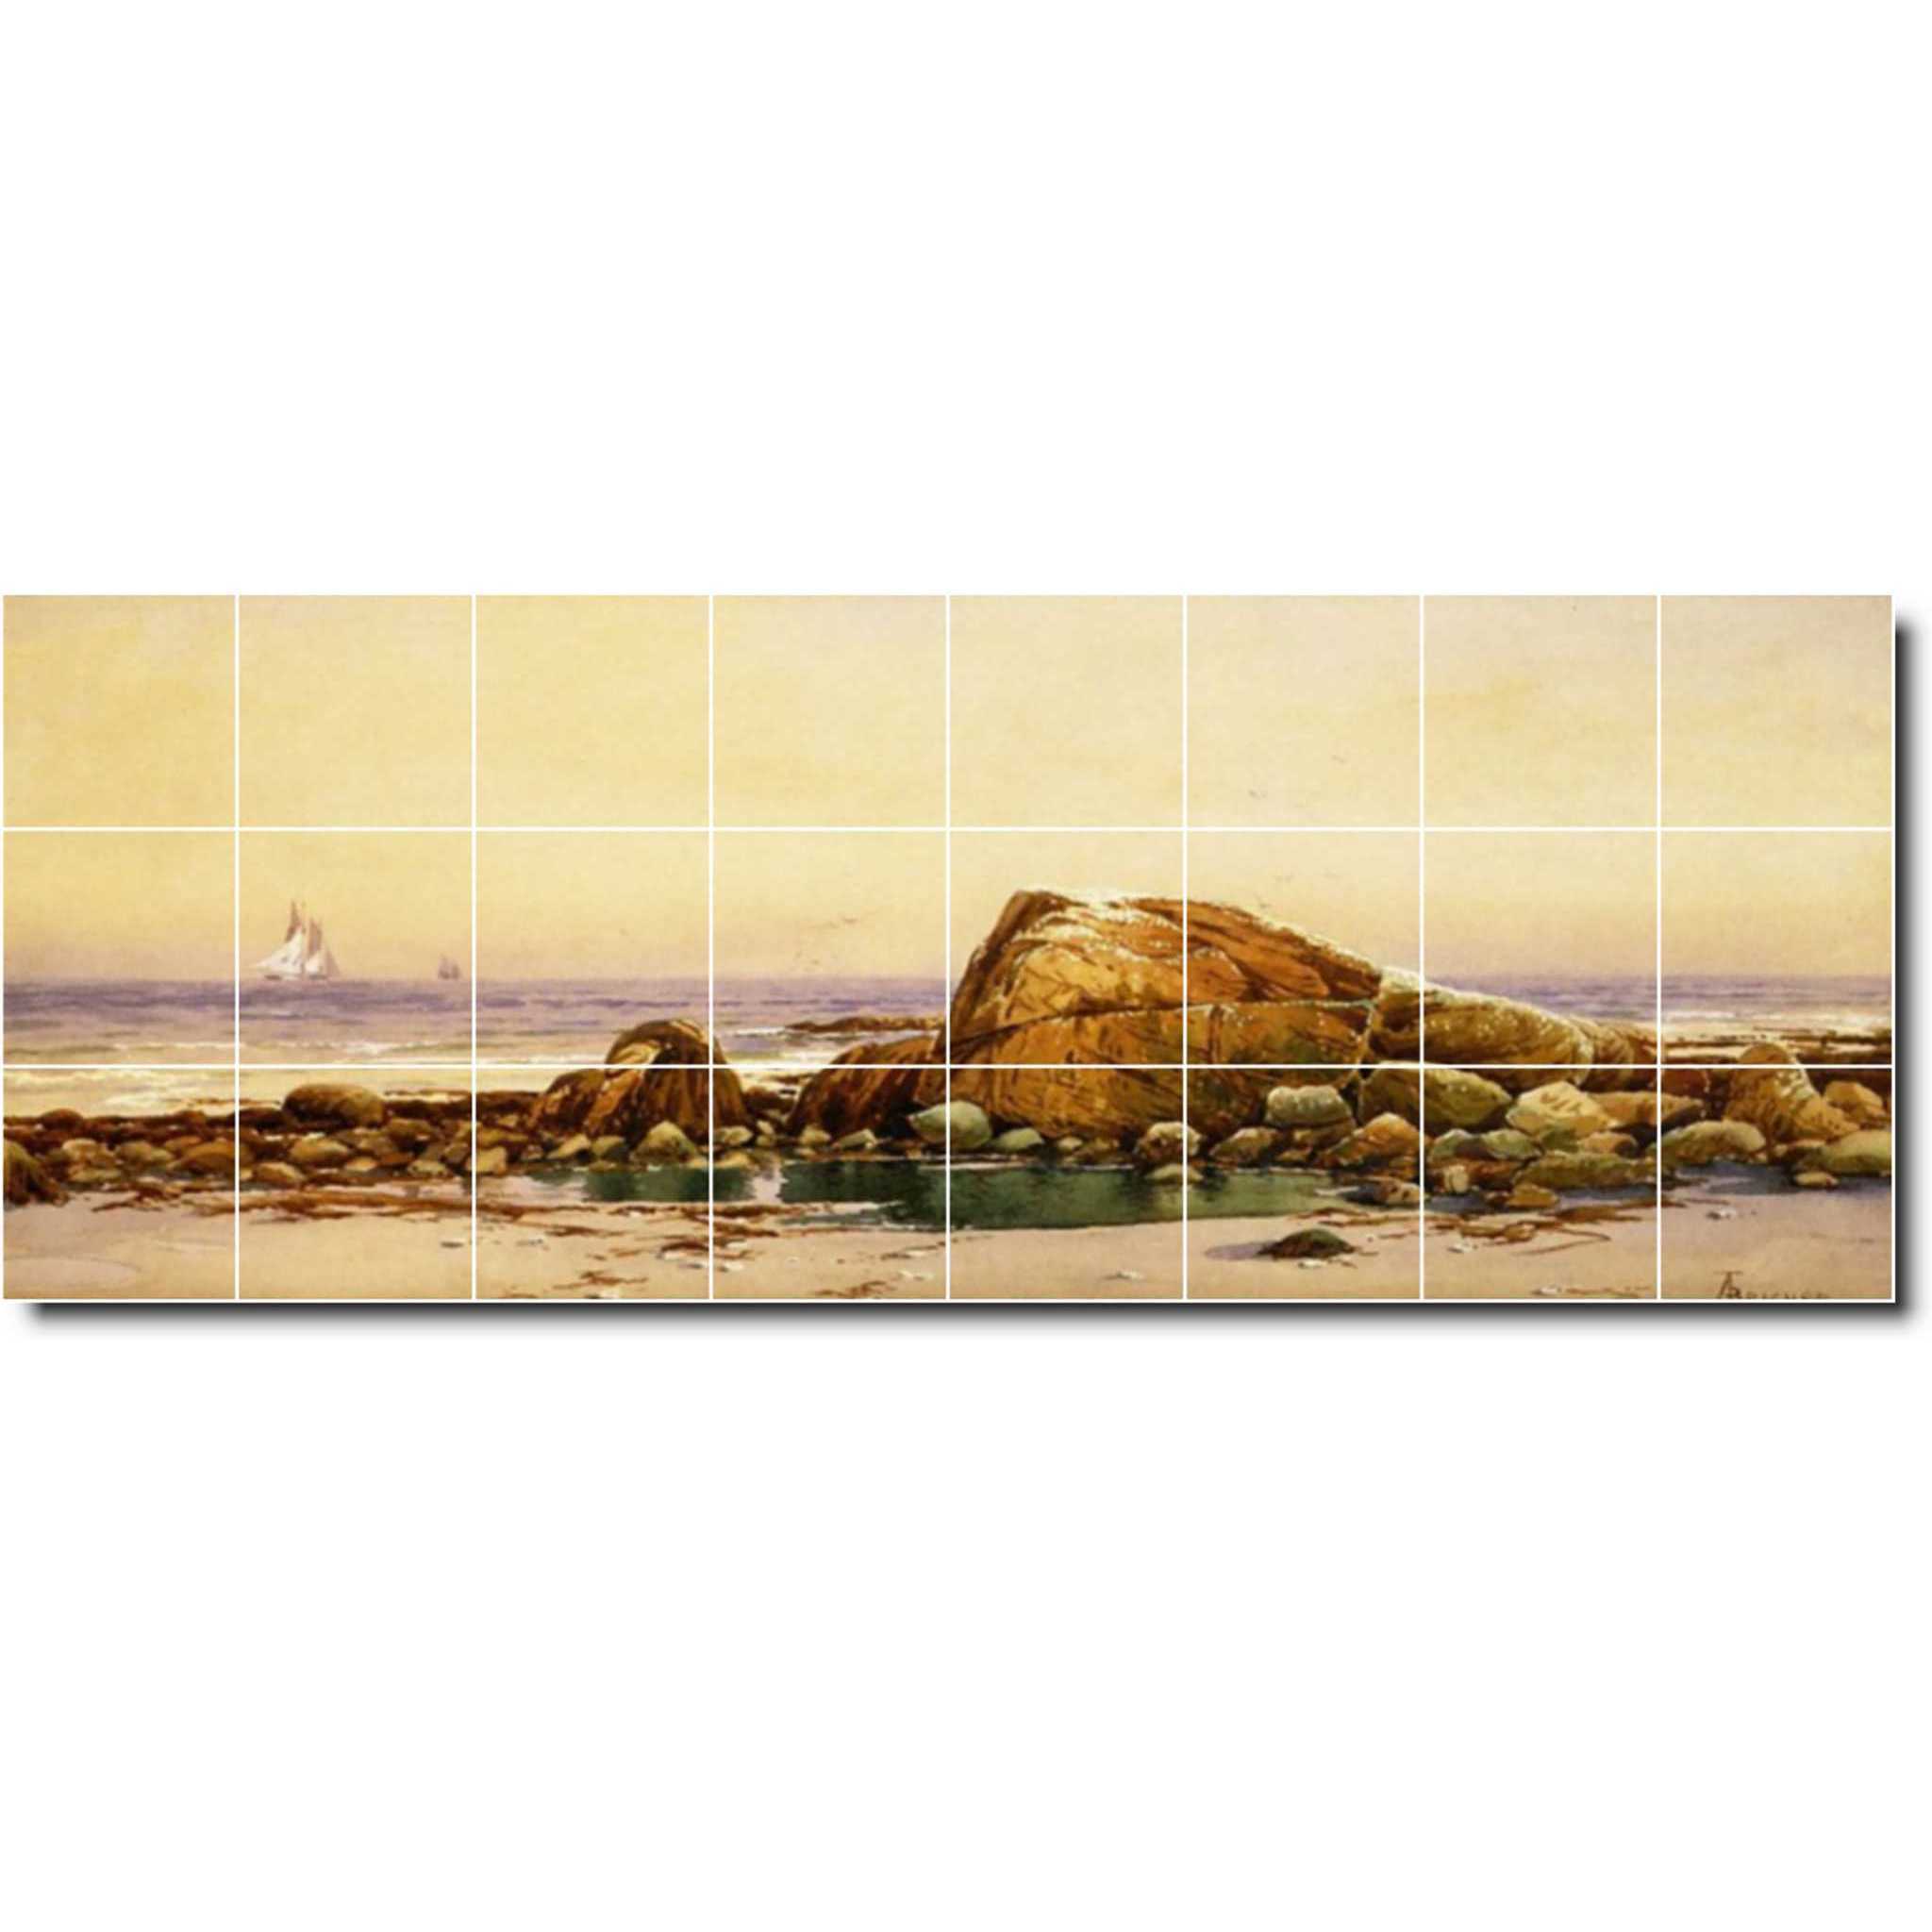 alfred bricher waterfront painting ceramic tile mural p01031